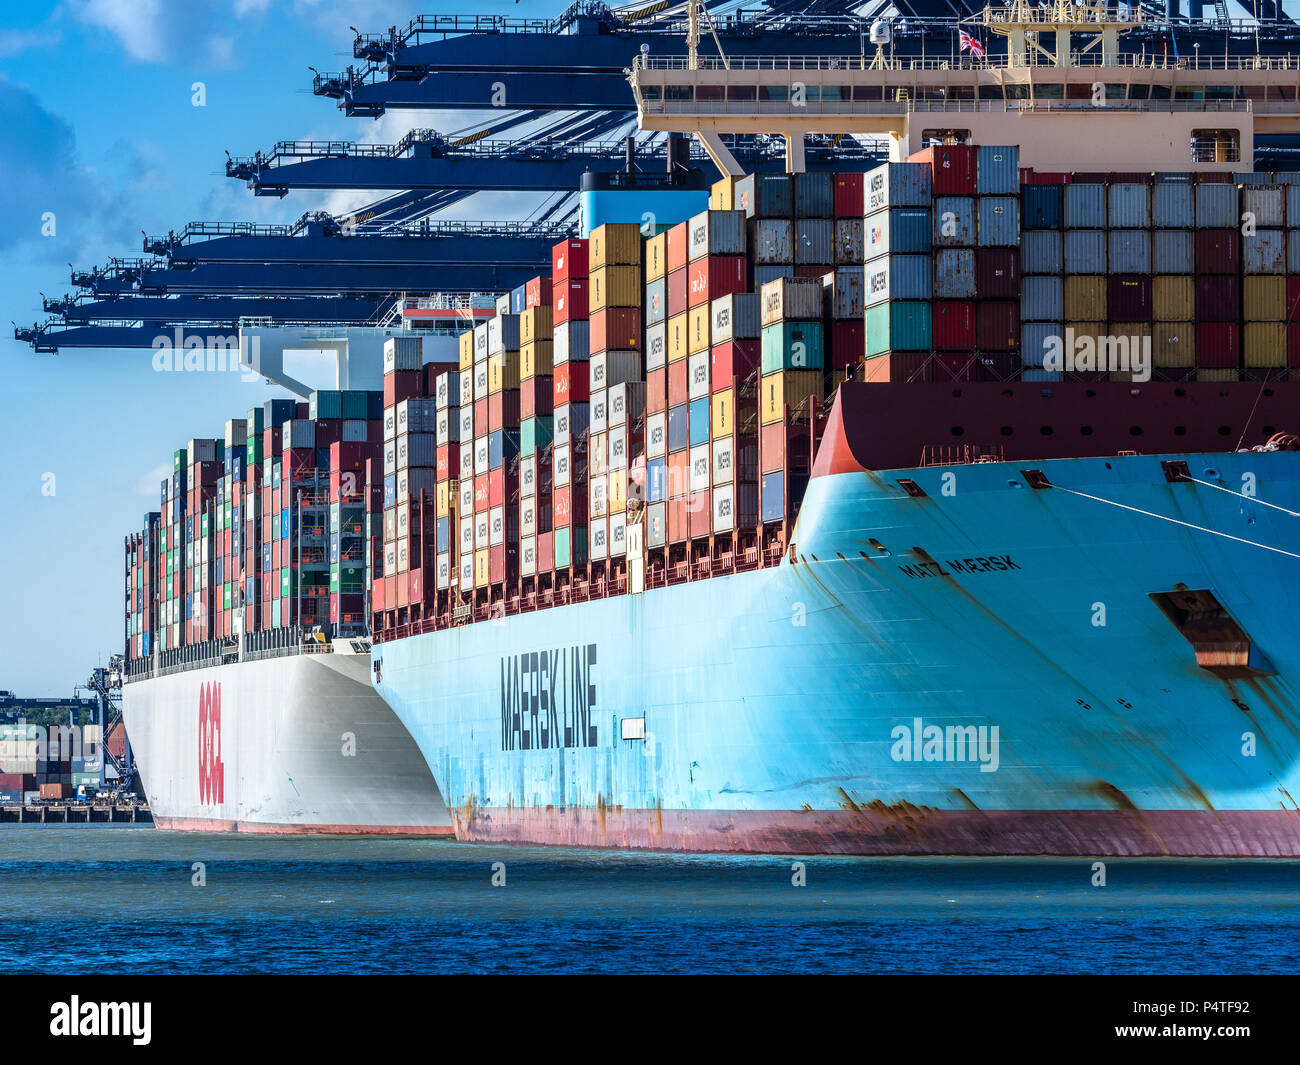 International Trade, World Trade. Container ships unload and load containers at the Port of Felixstowe, the UK's largest container port. Stock Photo